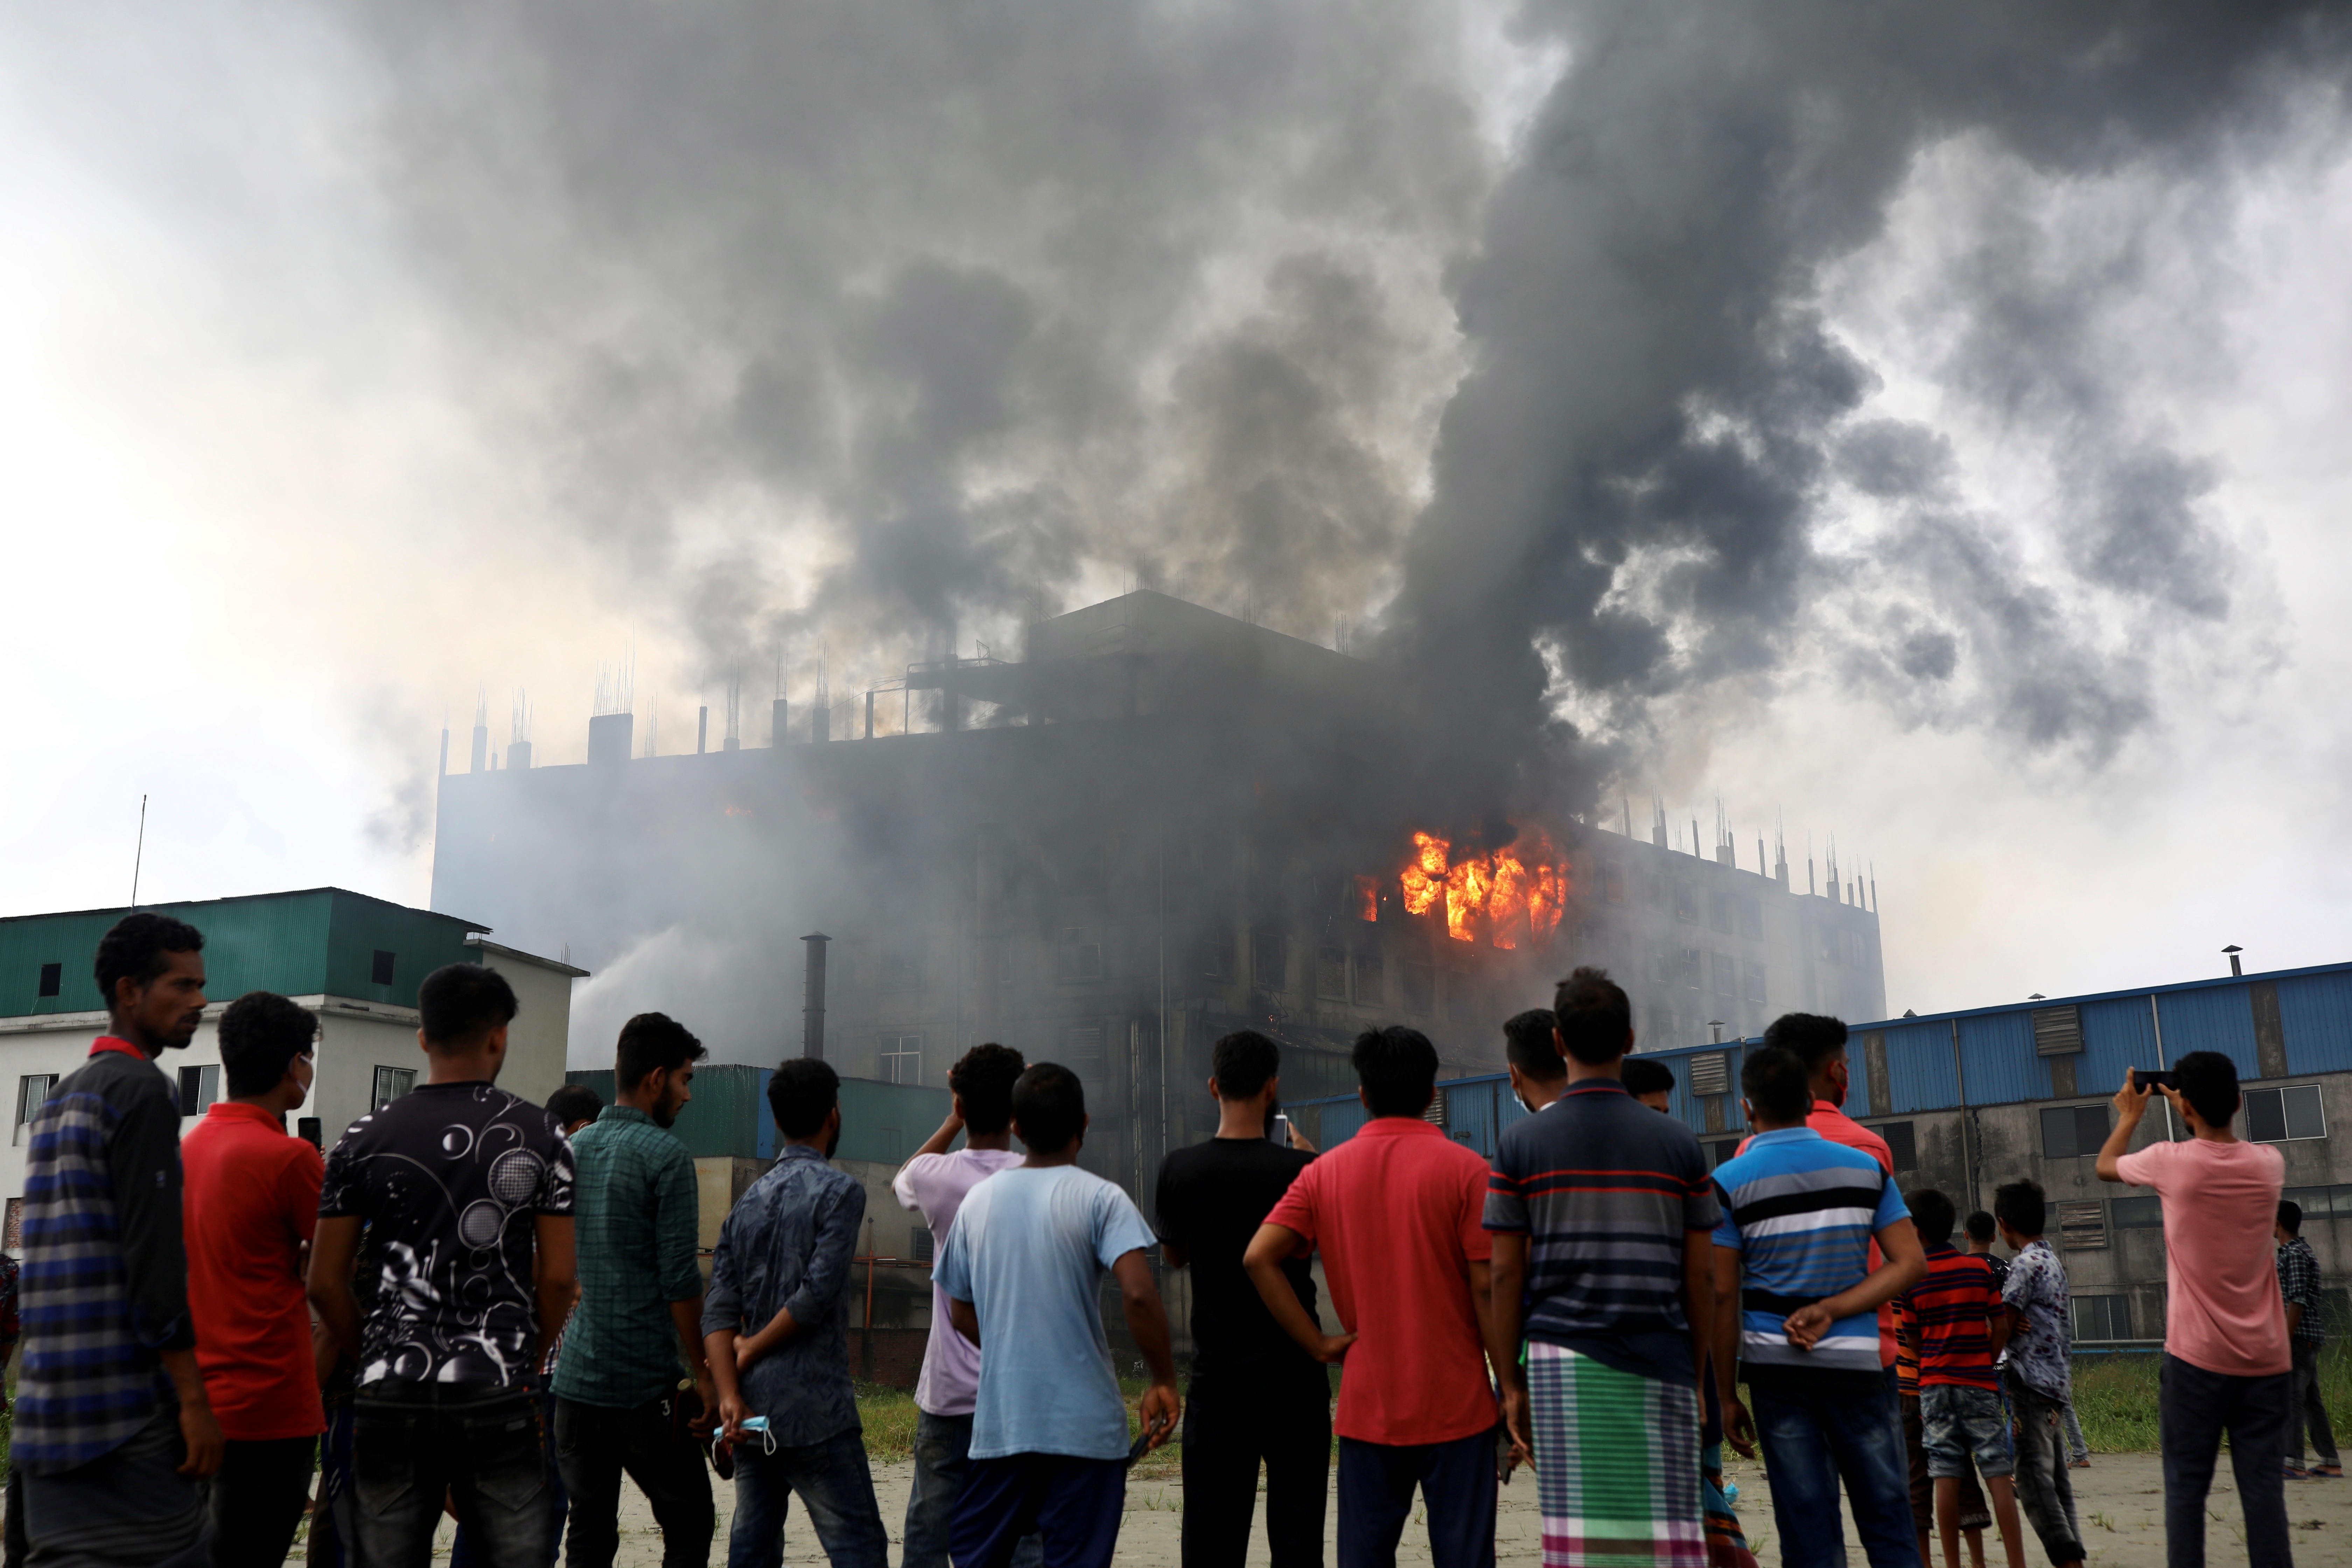 People look on as flames rise after a fire broke out at a Hashem Foods Ltd factory in Rupganj, Narayanganj district, on the outskirts of Dhaka, Bangladesh, July 9, 2021. REUTERS/Mohammad Ponir Hossain